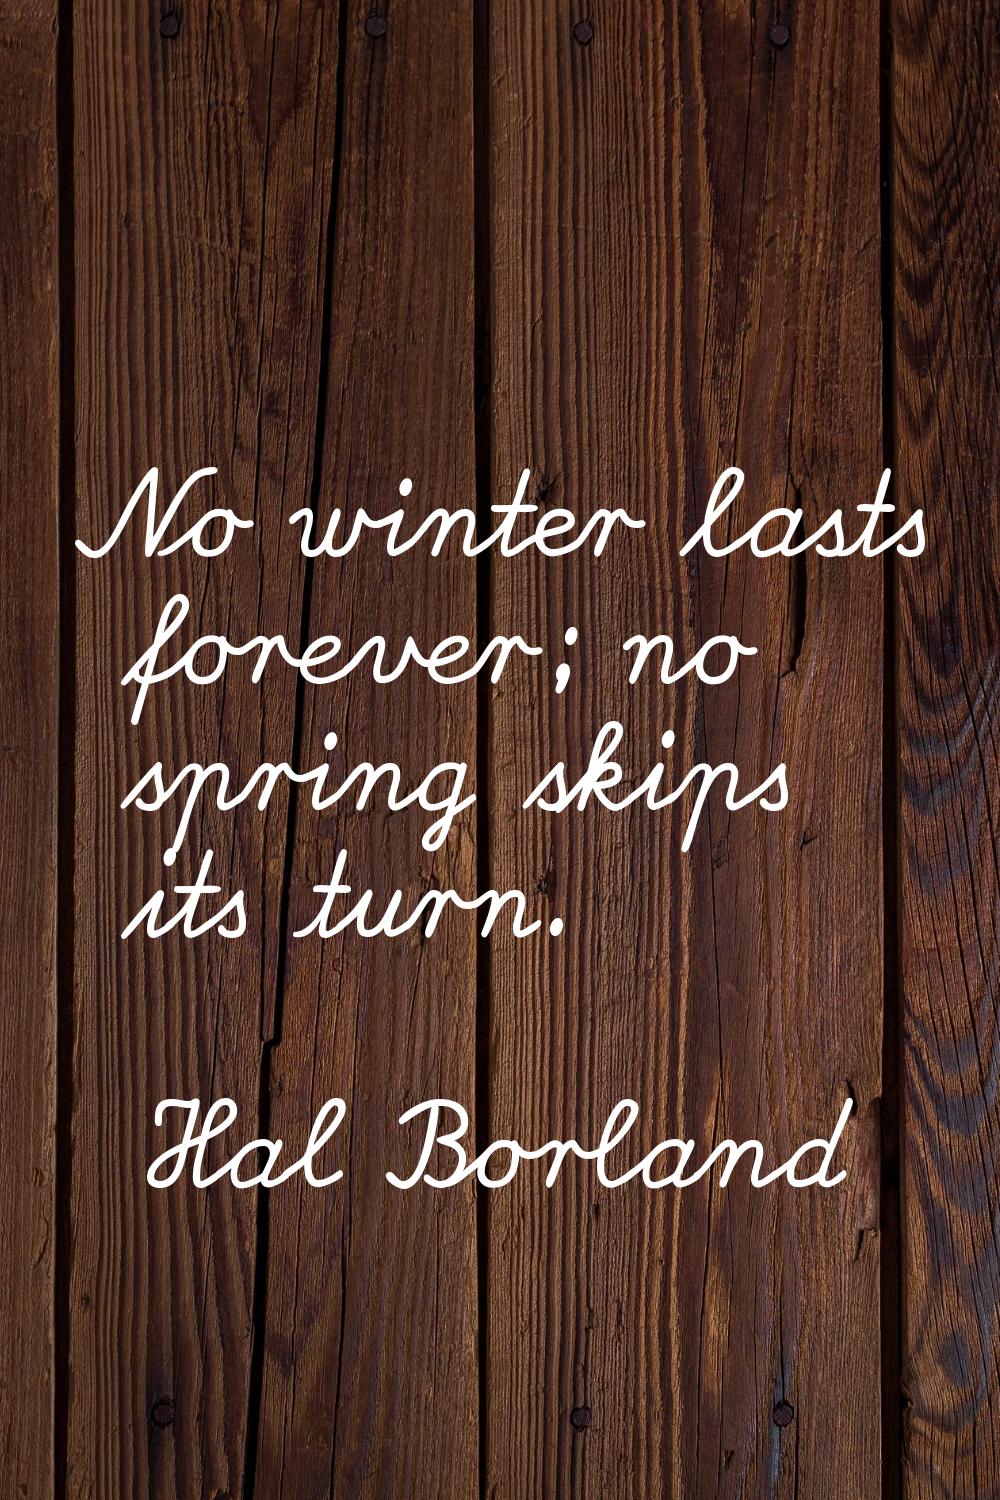 No winter lasts forever; no spring skips its turn.